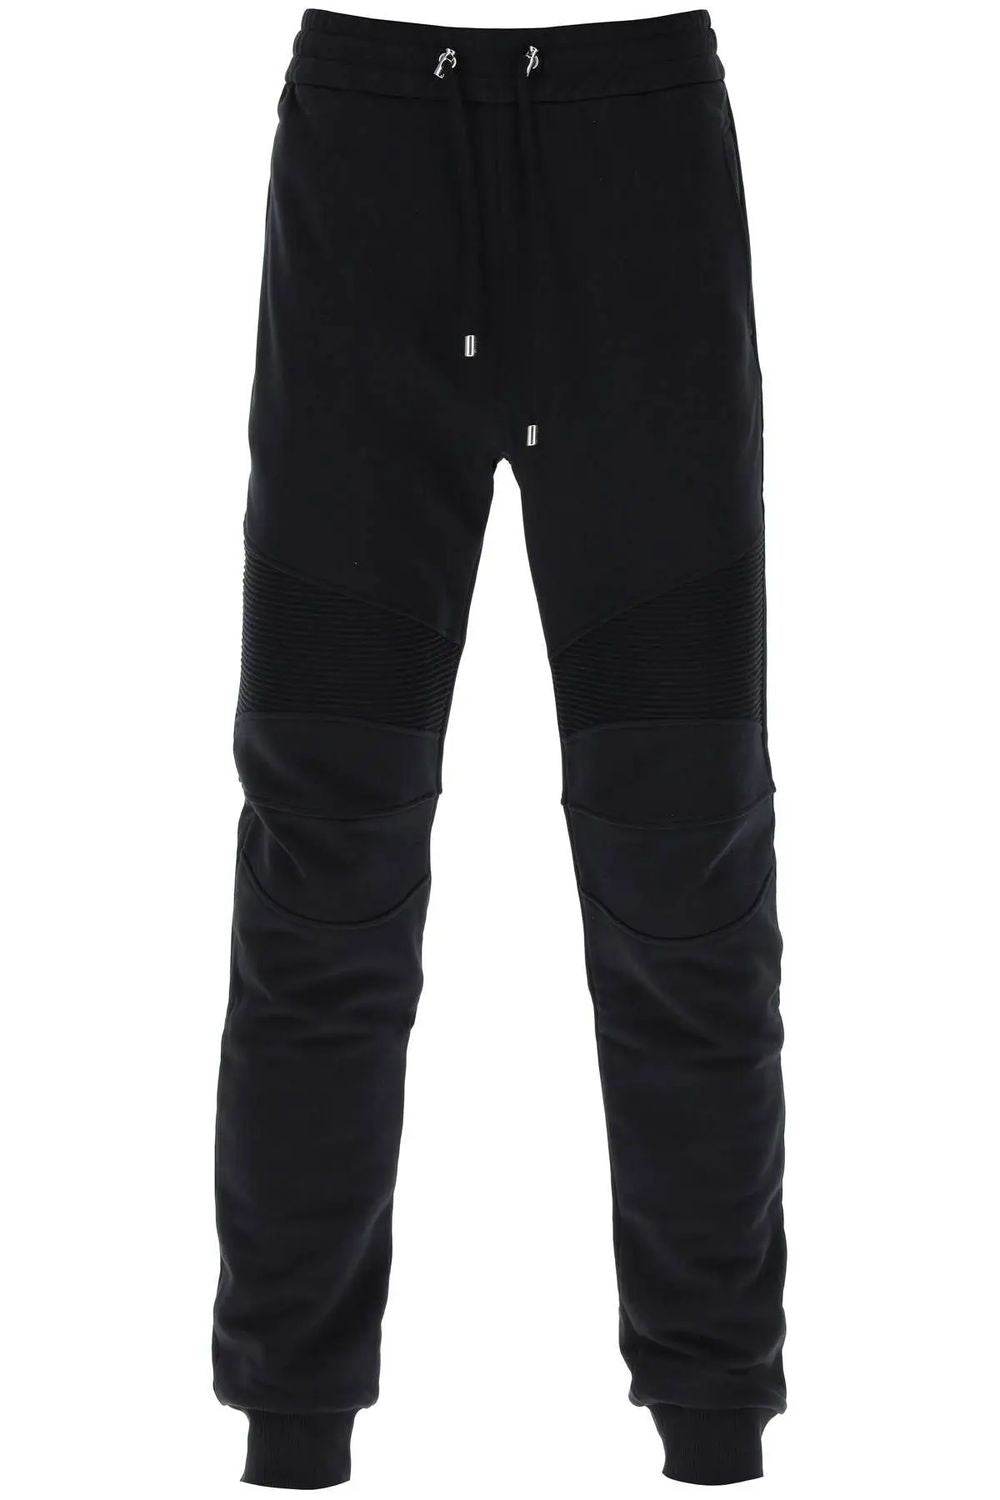 BALMAIN Slim Fit Joggers with Topstitched Inserts for Men